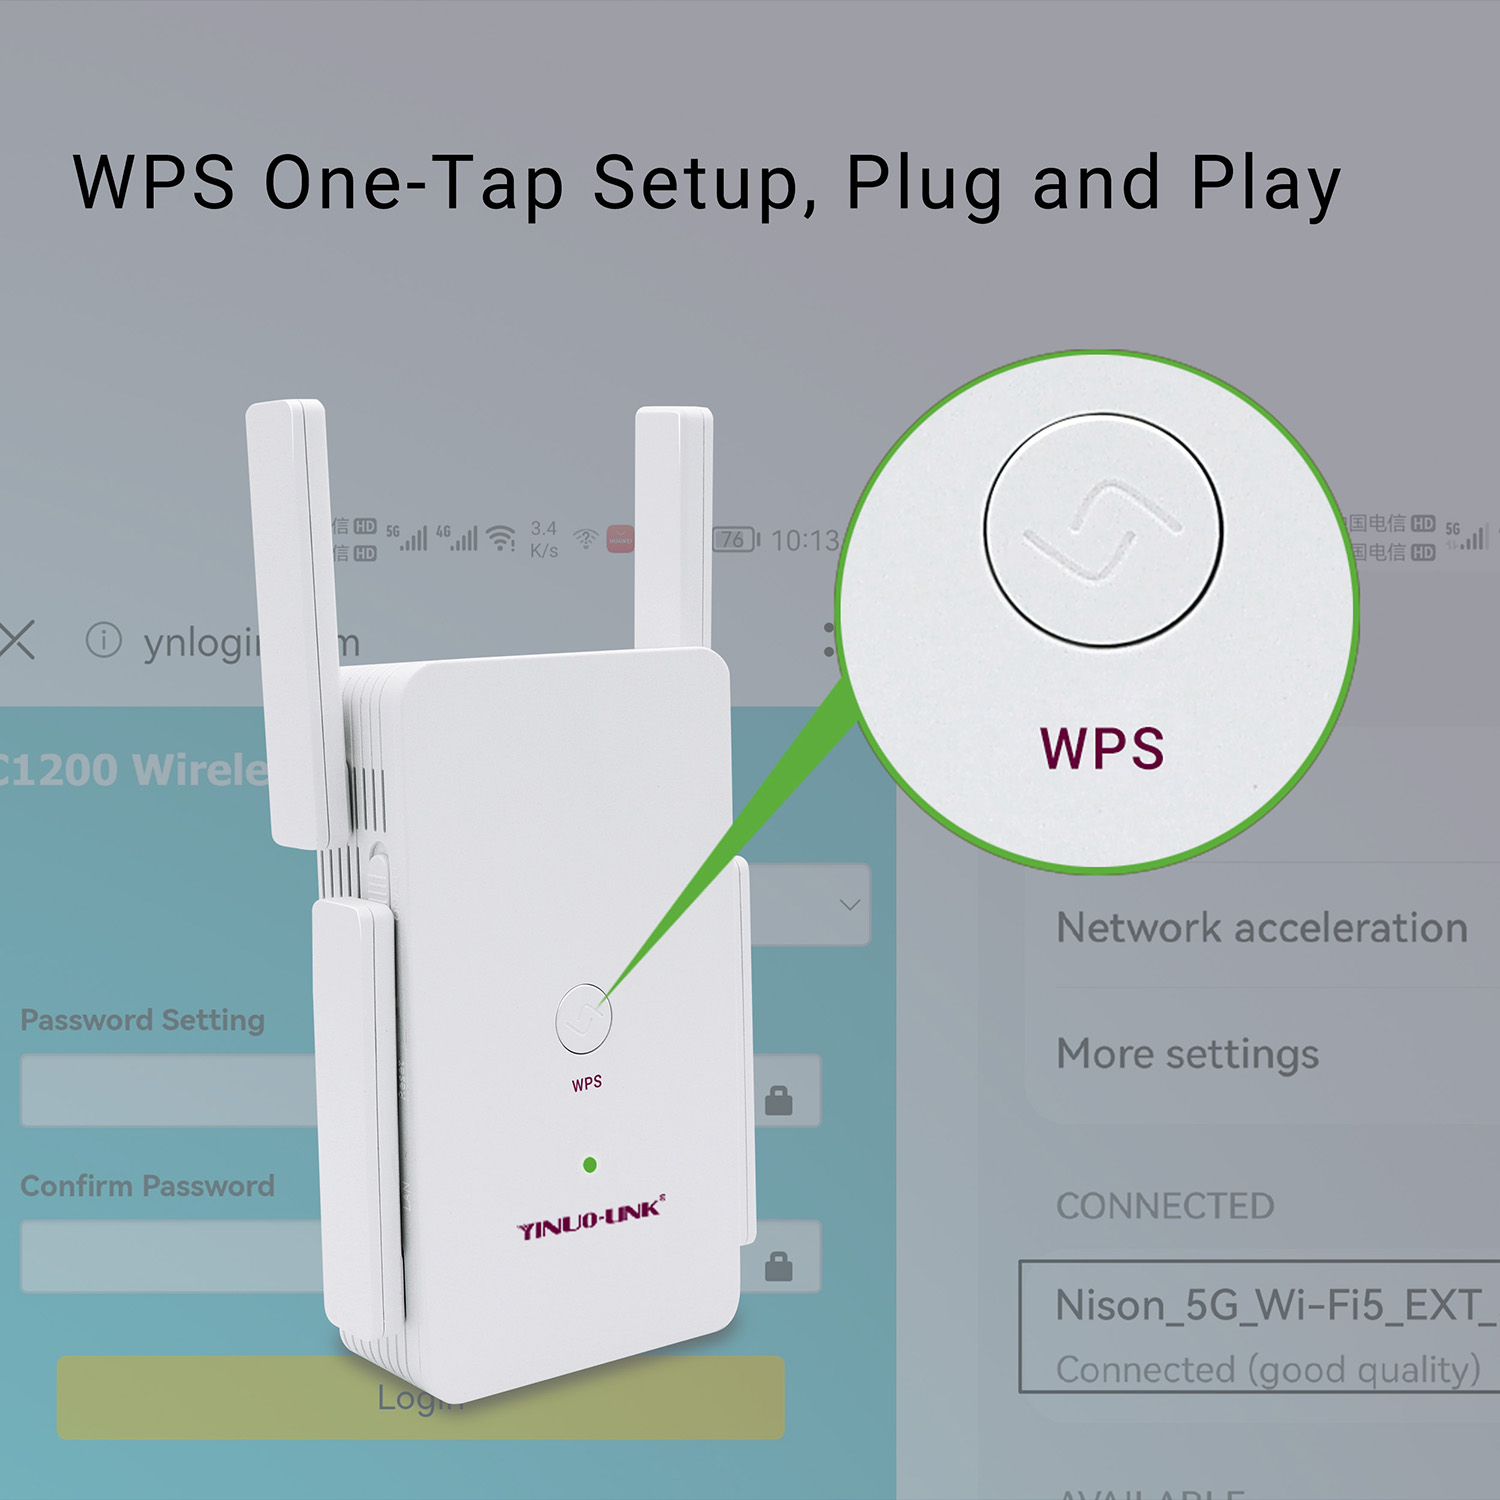 Boost Your WiFi Signal with YINUO-LINK's Wireless Router Booster